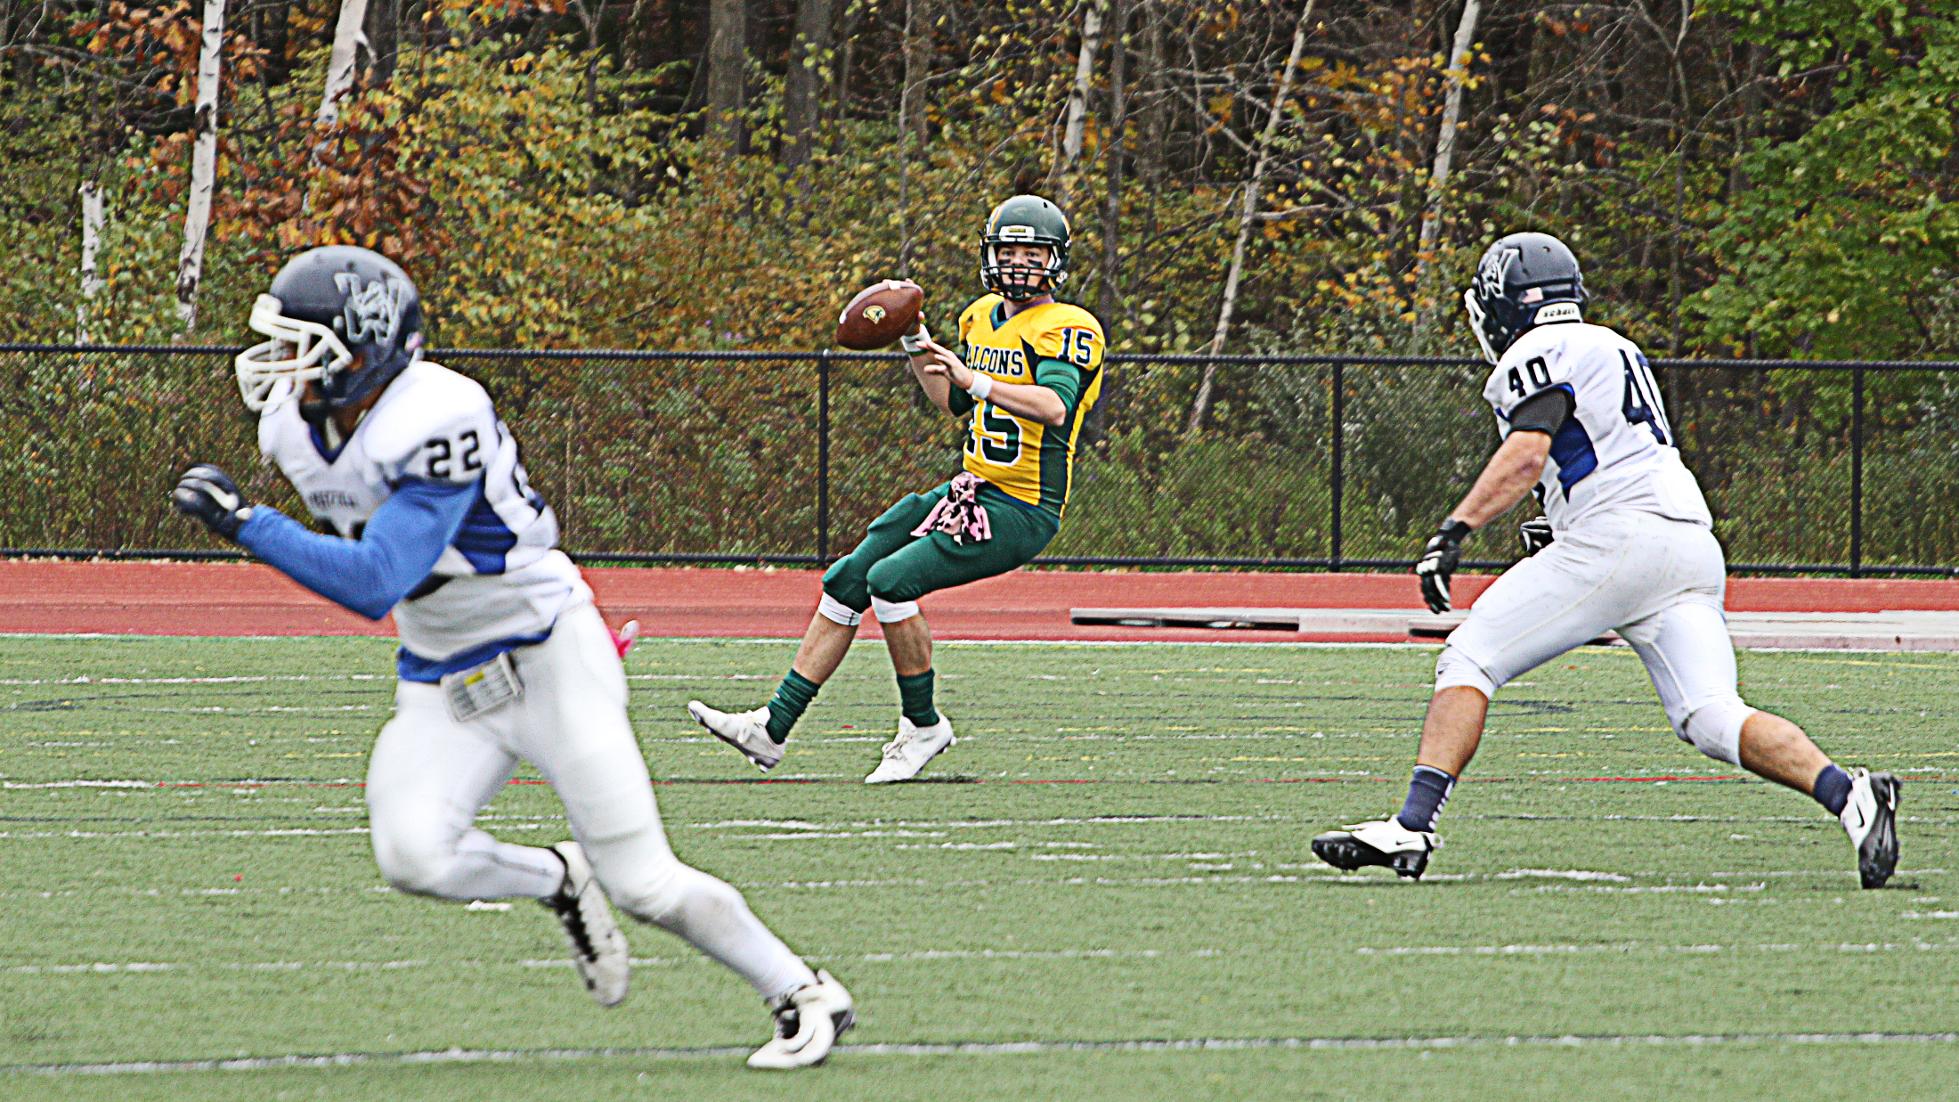 Fitzsimmons Selected MASCAC Football Rookie of the Week